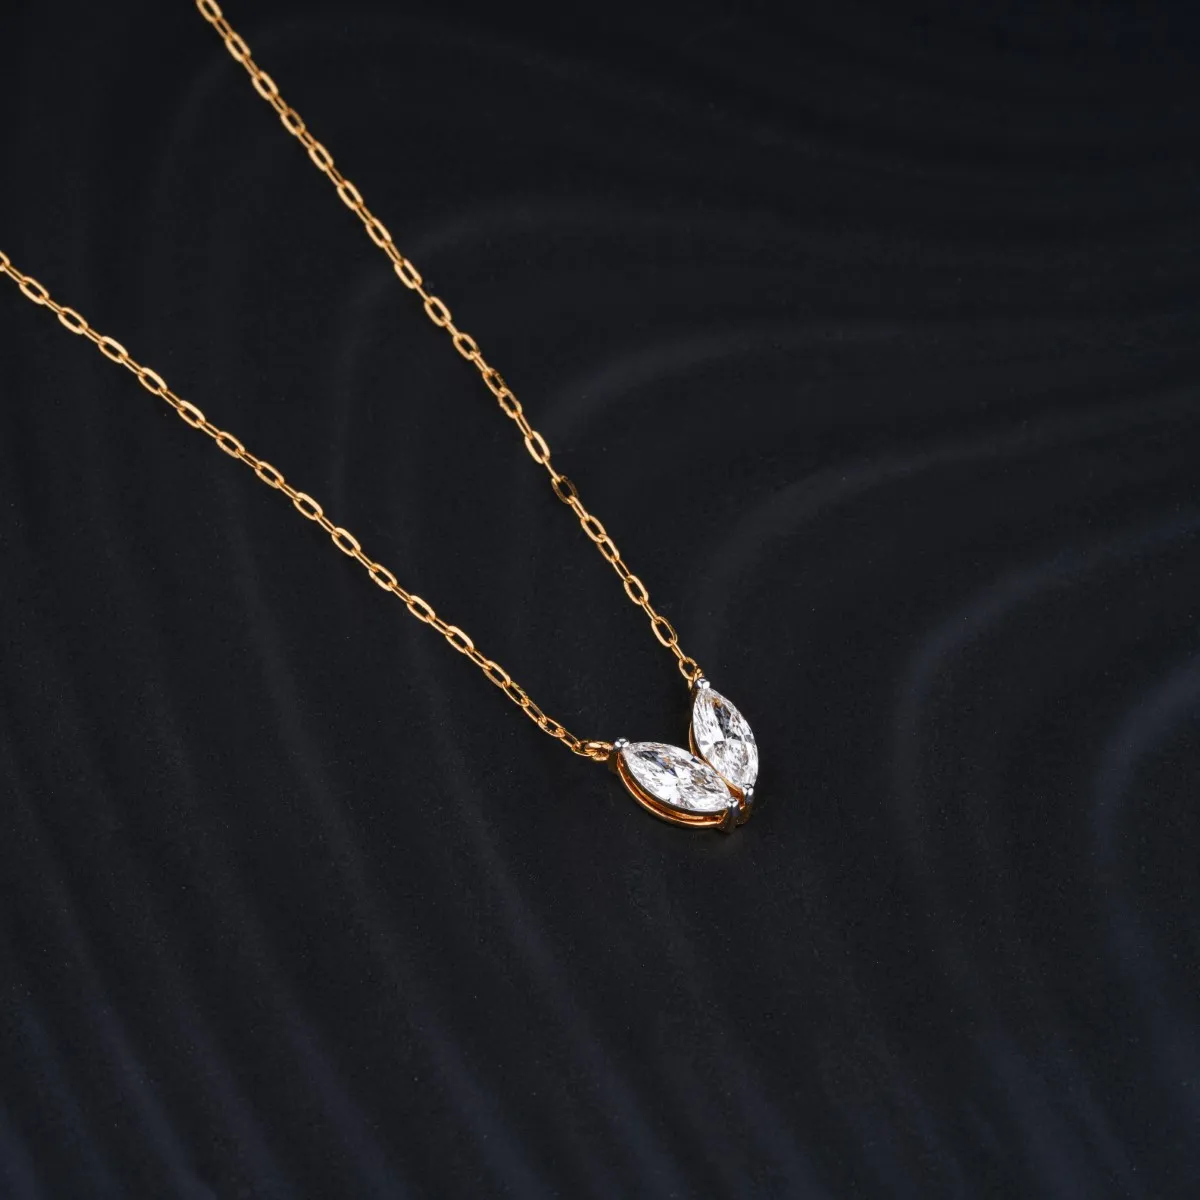 Marquise Cut Diamond Necklace | Marquise Pendant Necklace | Marquise Shape Diamond Necklace | Earthly Jewels